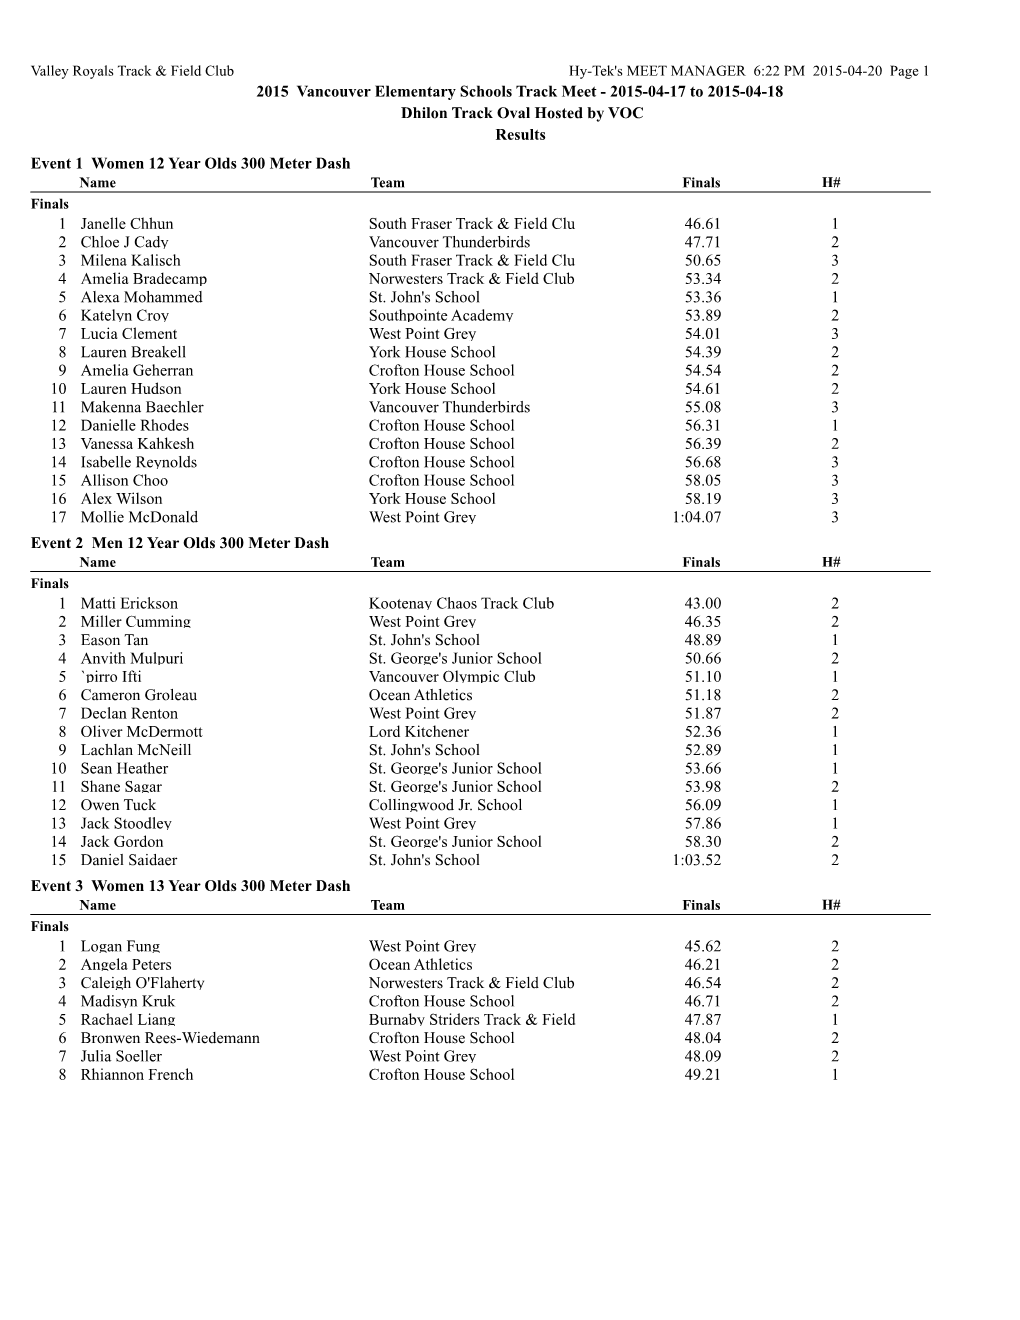 2015 Vancouver Elementary Schools Track Meet - 2015-04-17 to 2015-04-18 Dhilon Track Oval Hosted by VOC Results